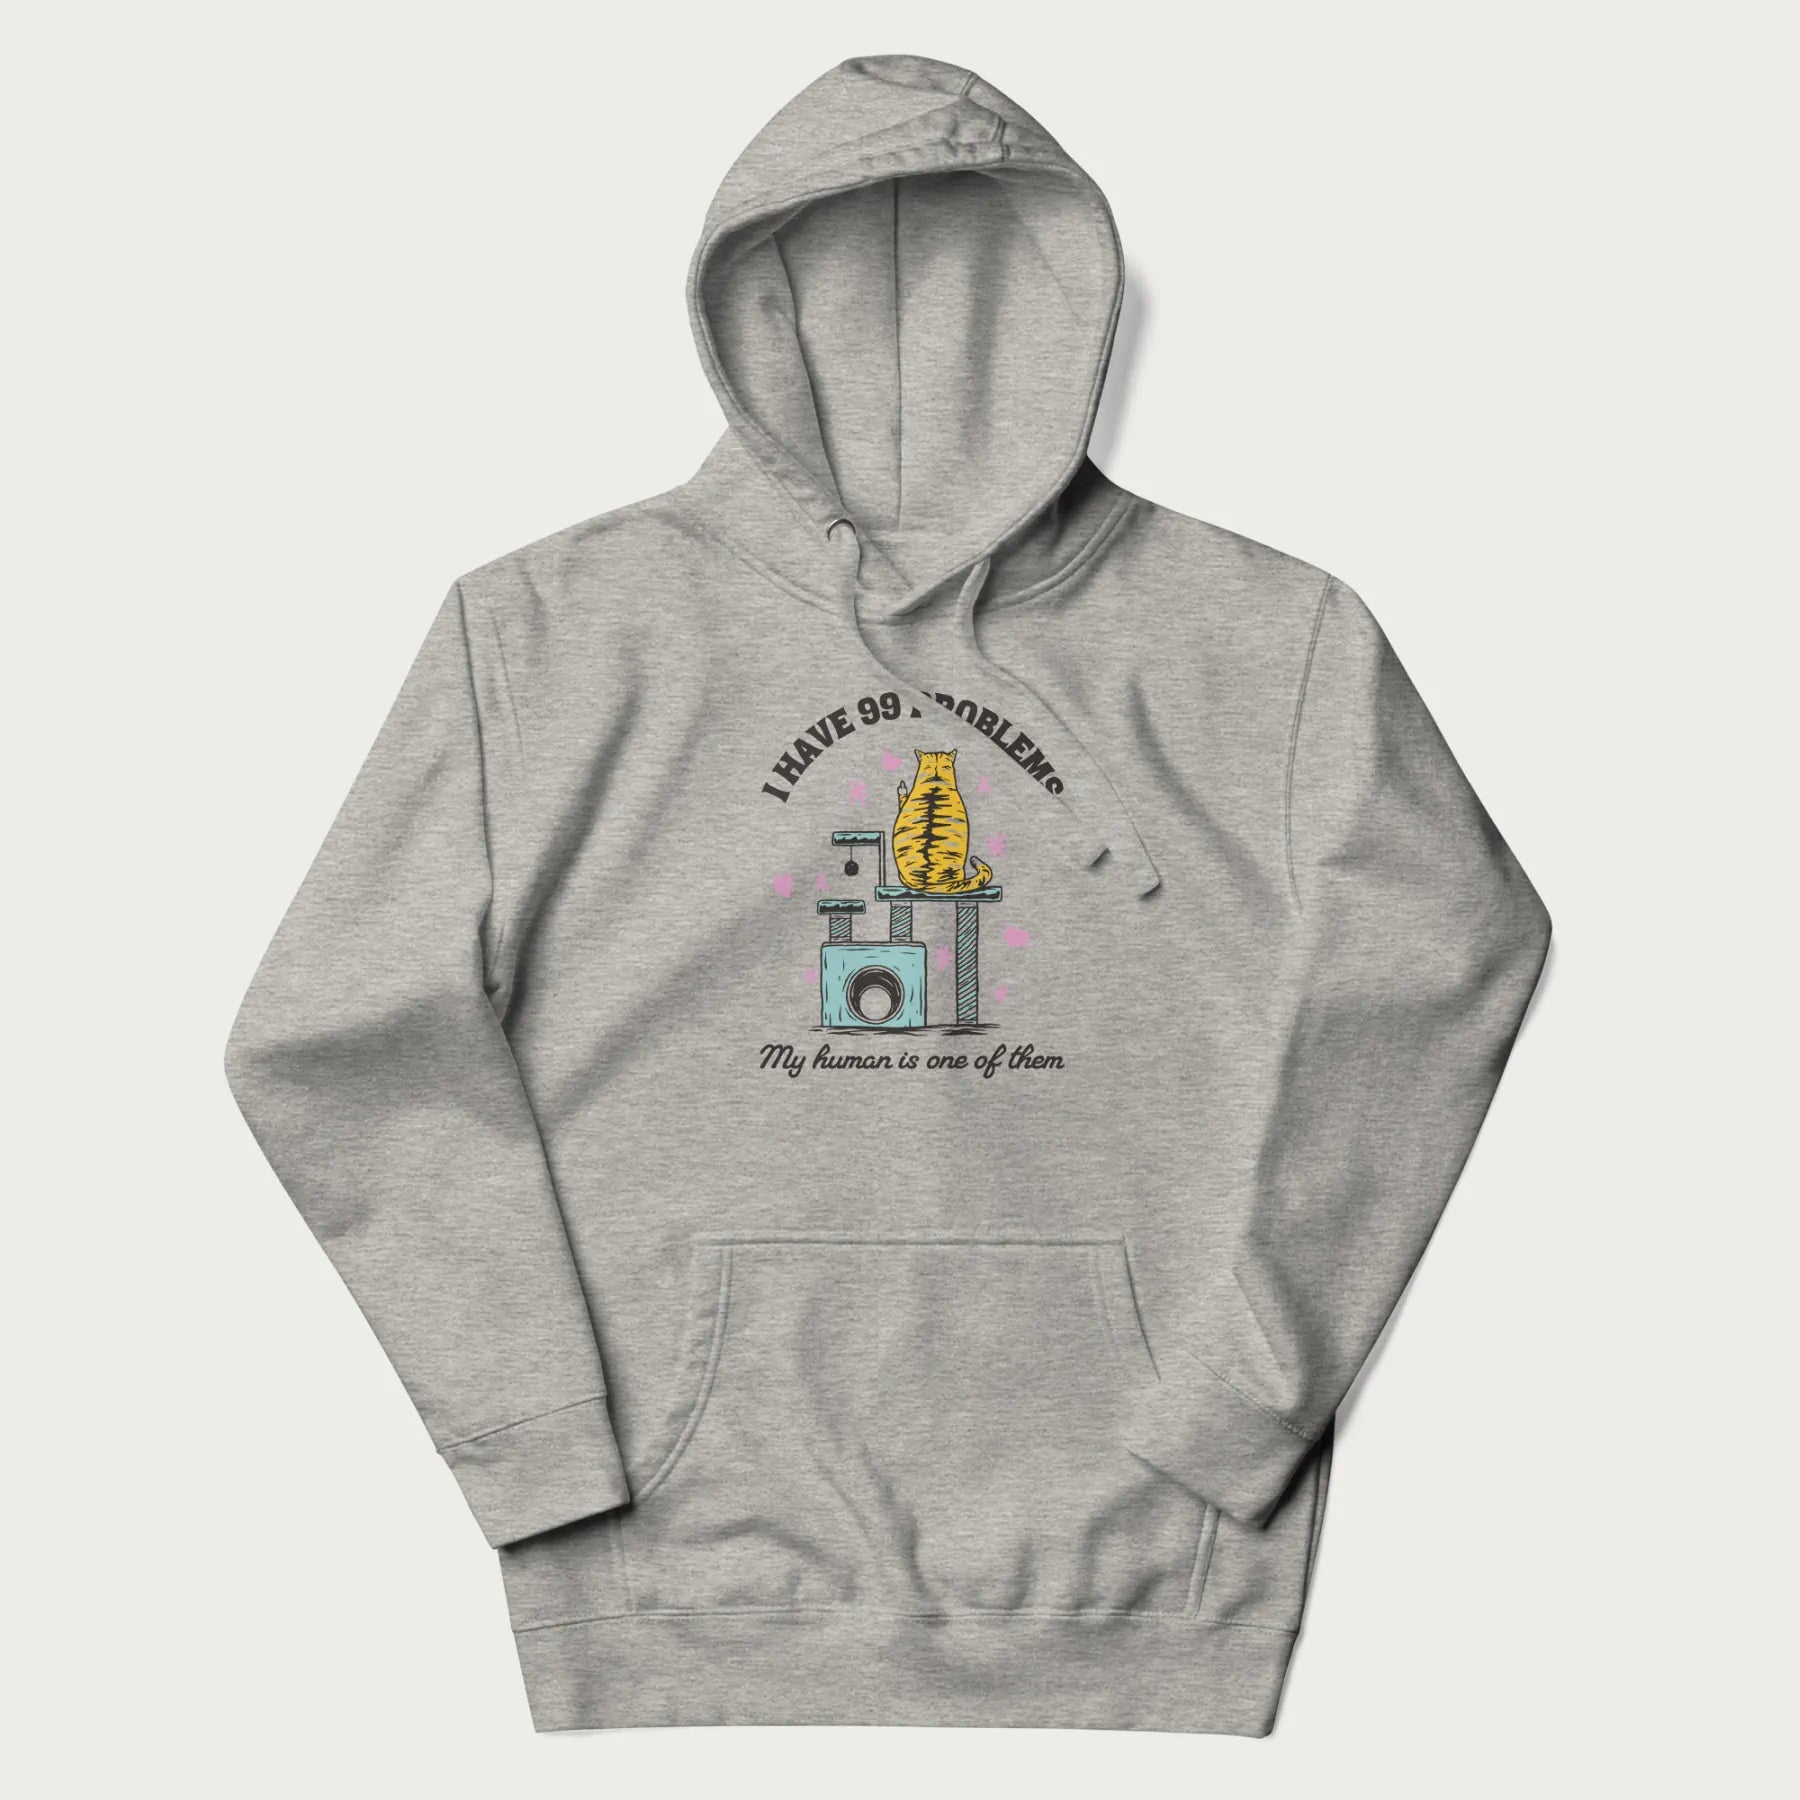 Light grey hoodie with graphic of a cat on a scratching post and text 'i have 99 problems, my human is one of them'.